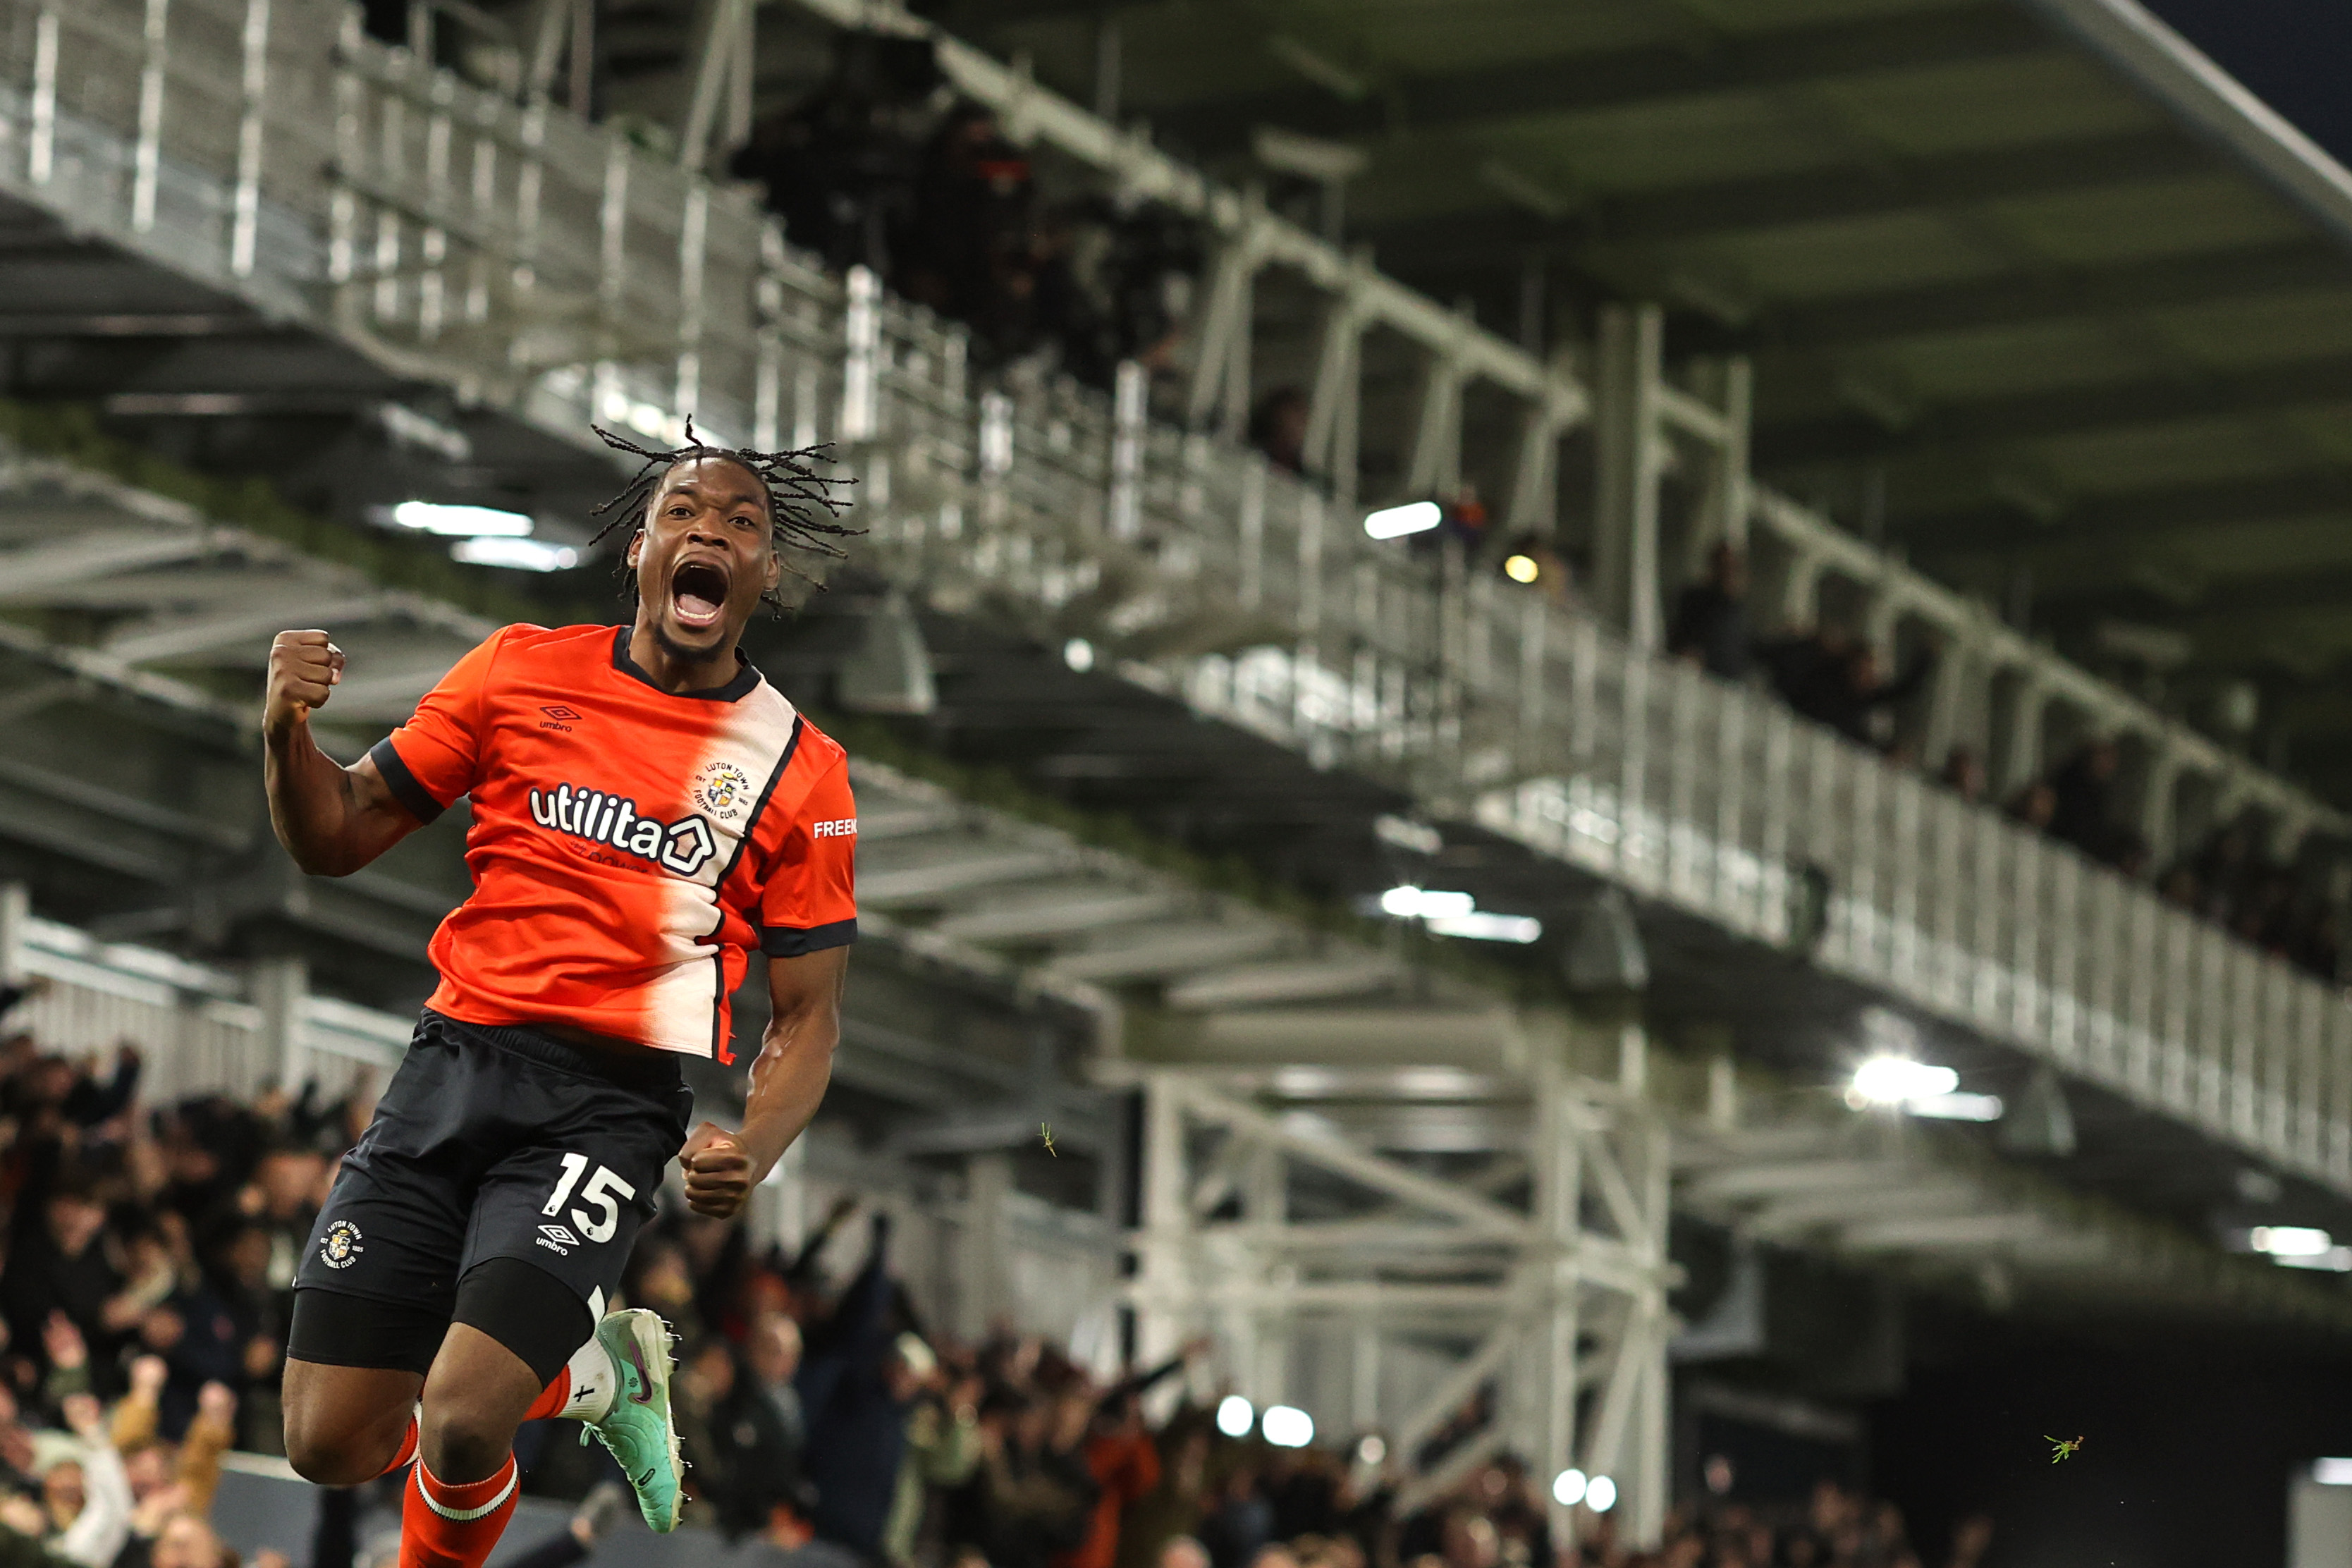 Luton are finding their feet in the Premier League